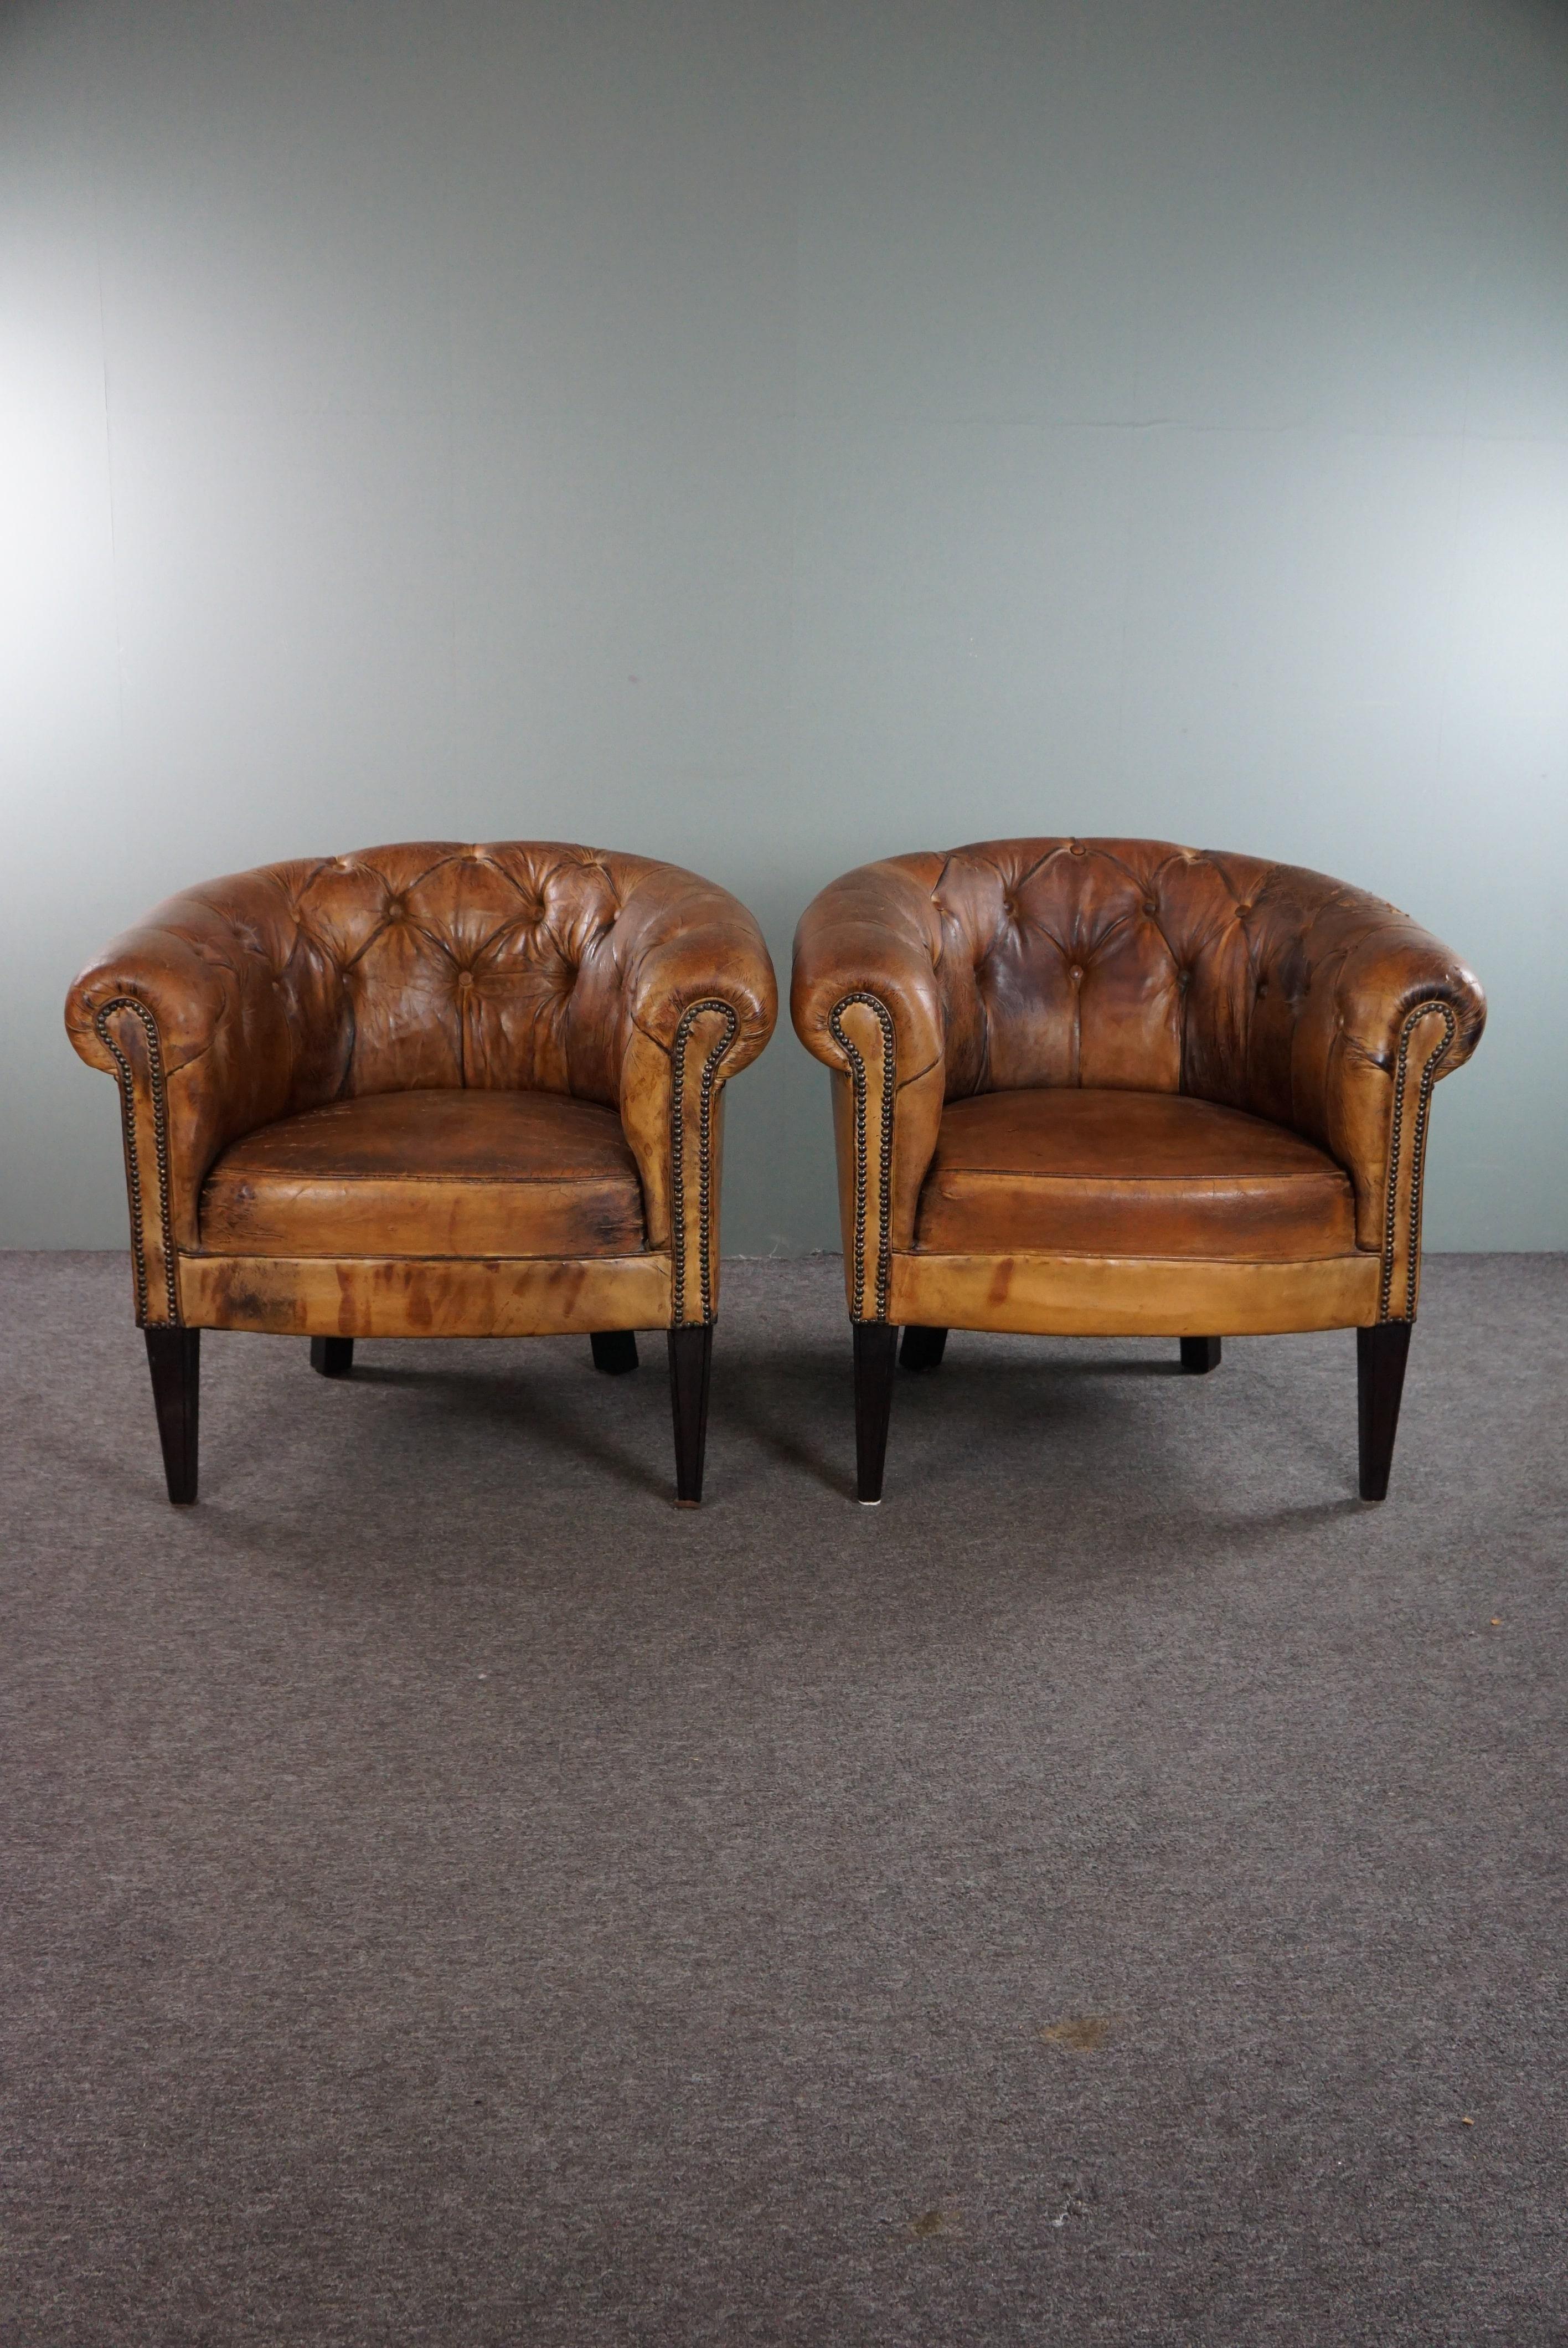 Offered: this set of two super cool old sheep leather Chesterfield club armchairs with an amazing look.
Some armchairs possess so much more charm and character than the rest that we actually want to place them in our own home—they're that cool! This